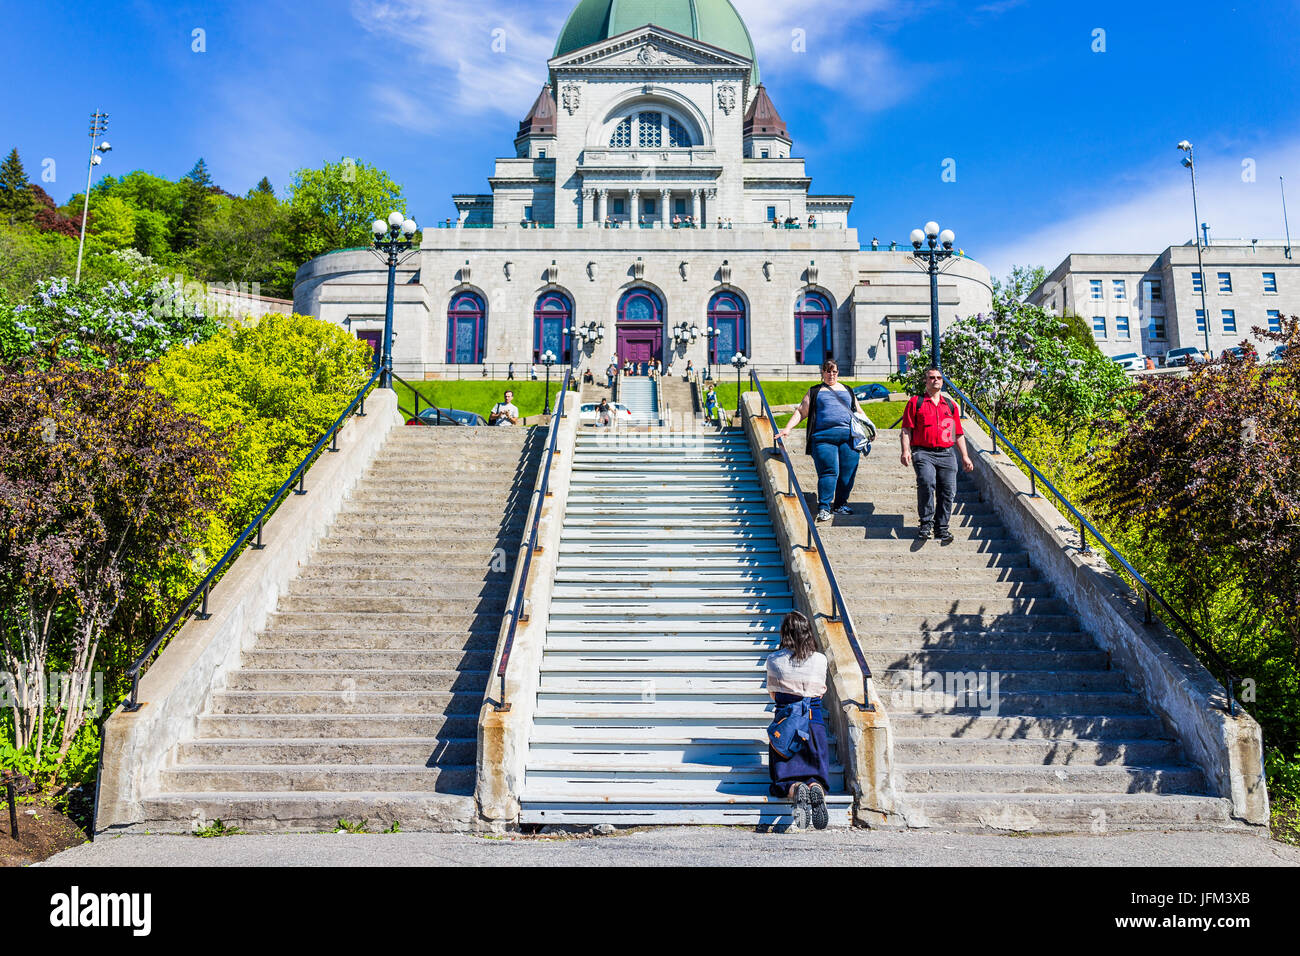 Montreal, Canada - May 28, 2017: St Joseph's Oratory on Mont Royal with woman praying on steps in Quebec region city Stock Photo